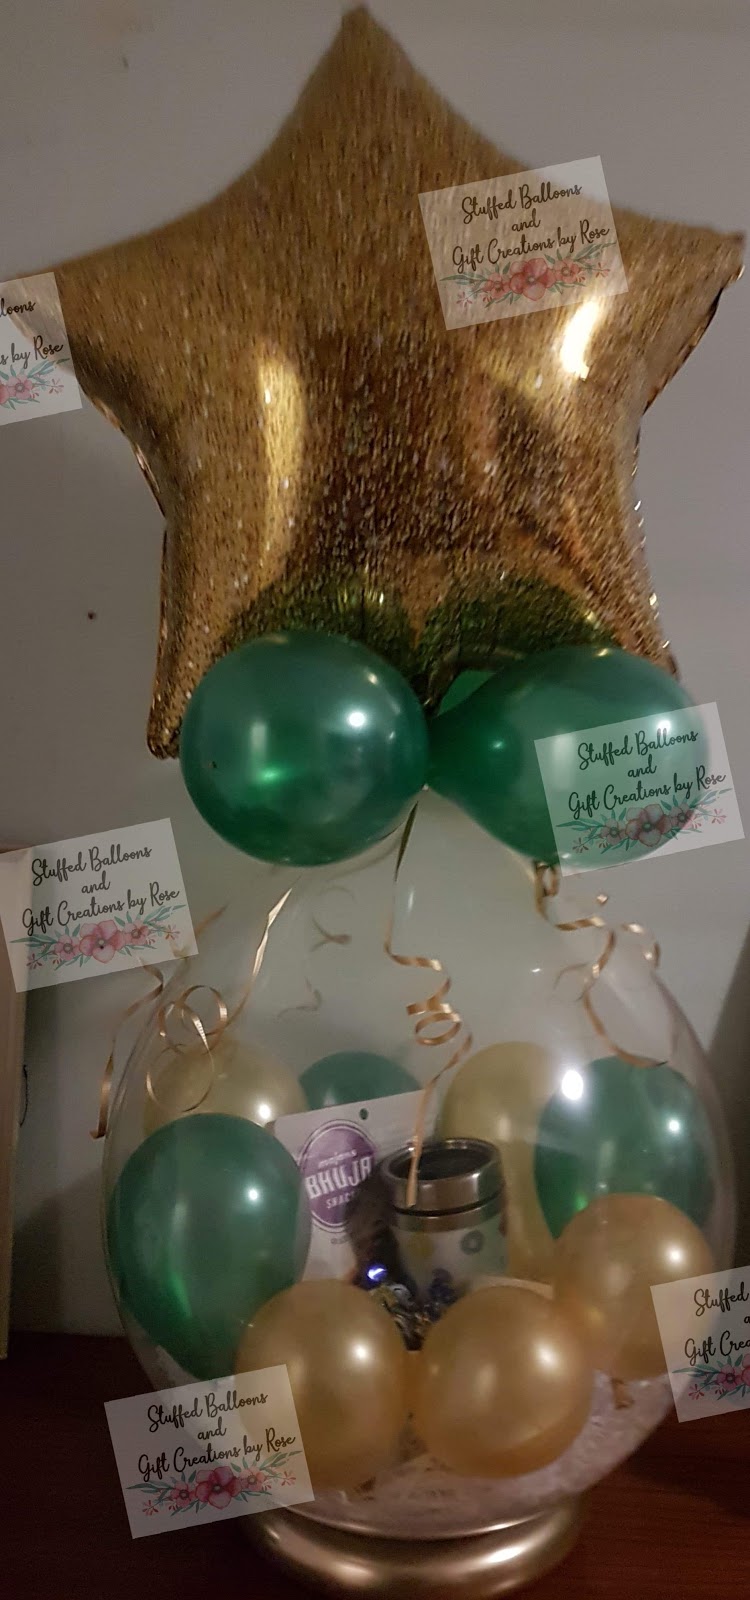 Stuffed Balloons & Gift Creations by Rose | France St, Eastern Heights QLD 4305, Australia | Phone: 0414 775 102